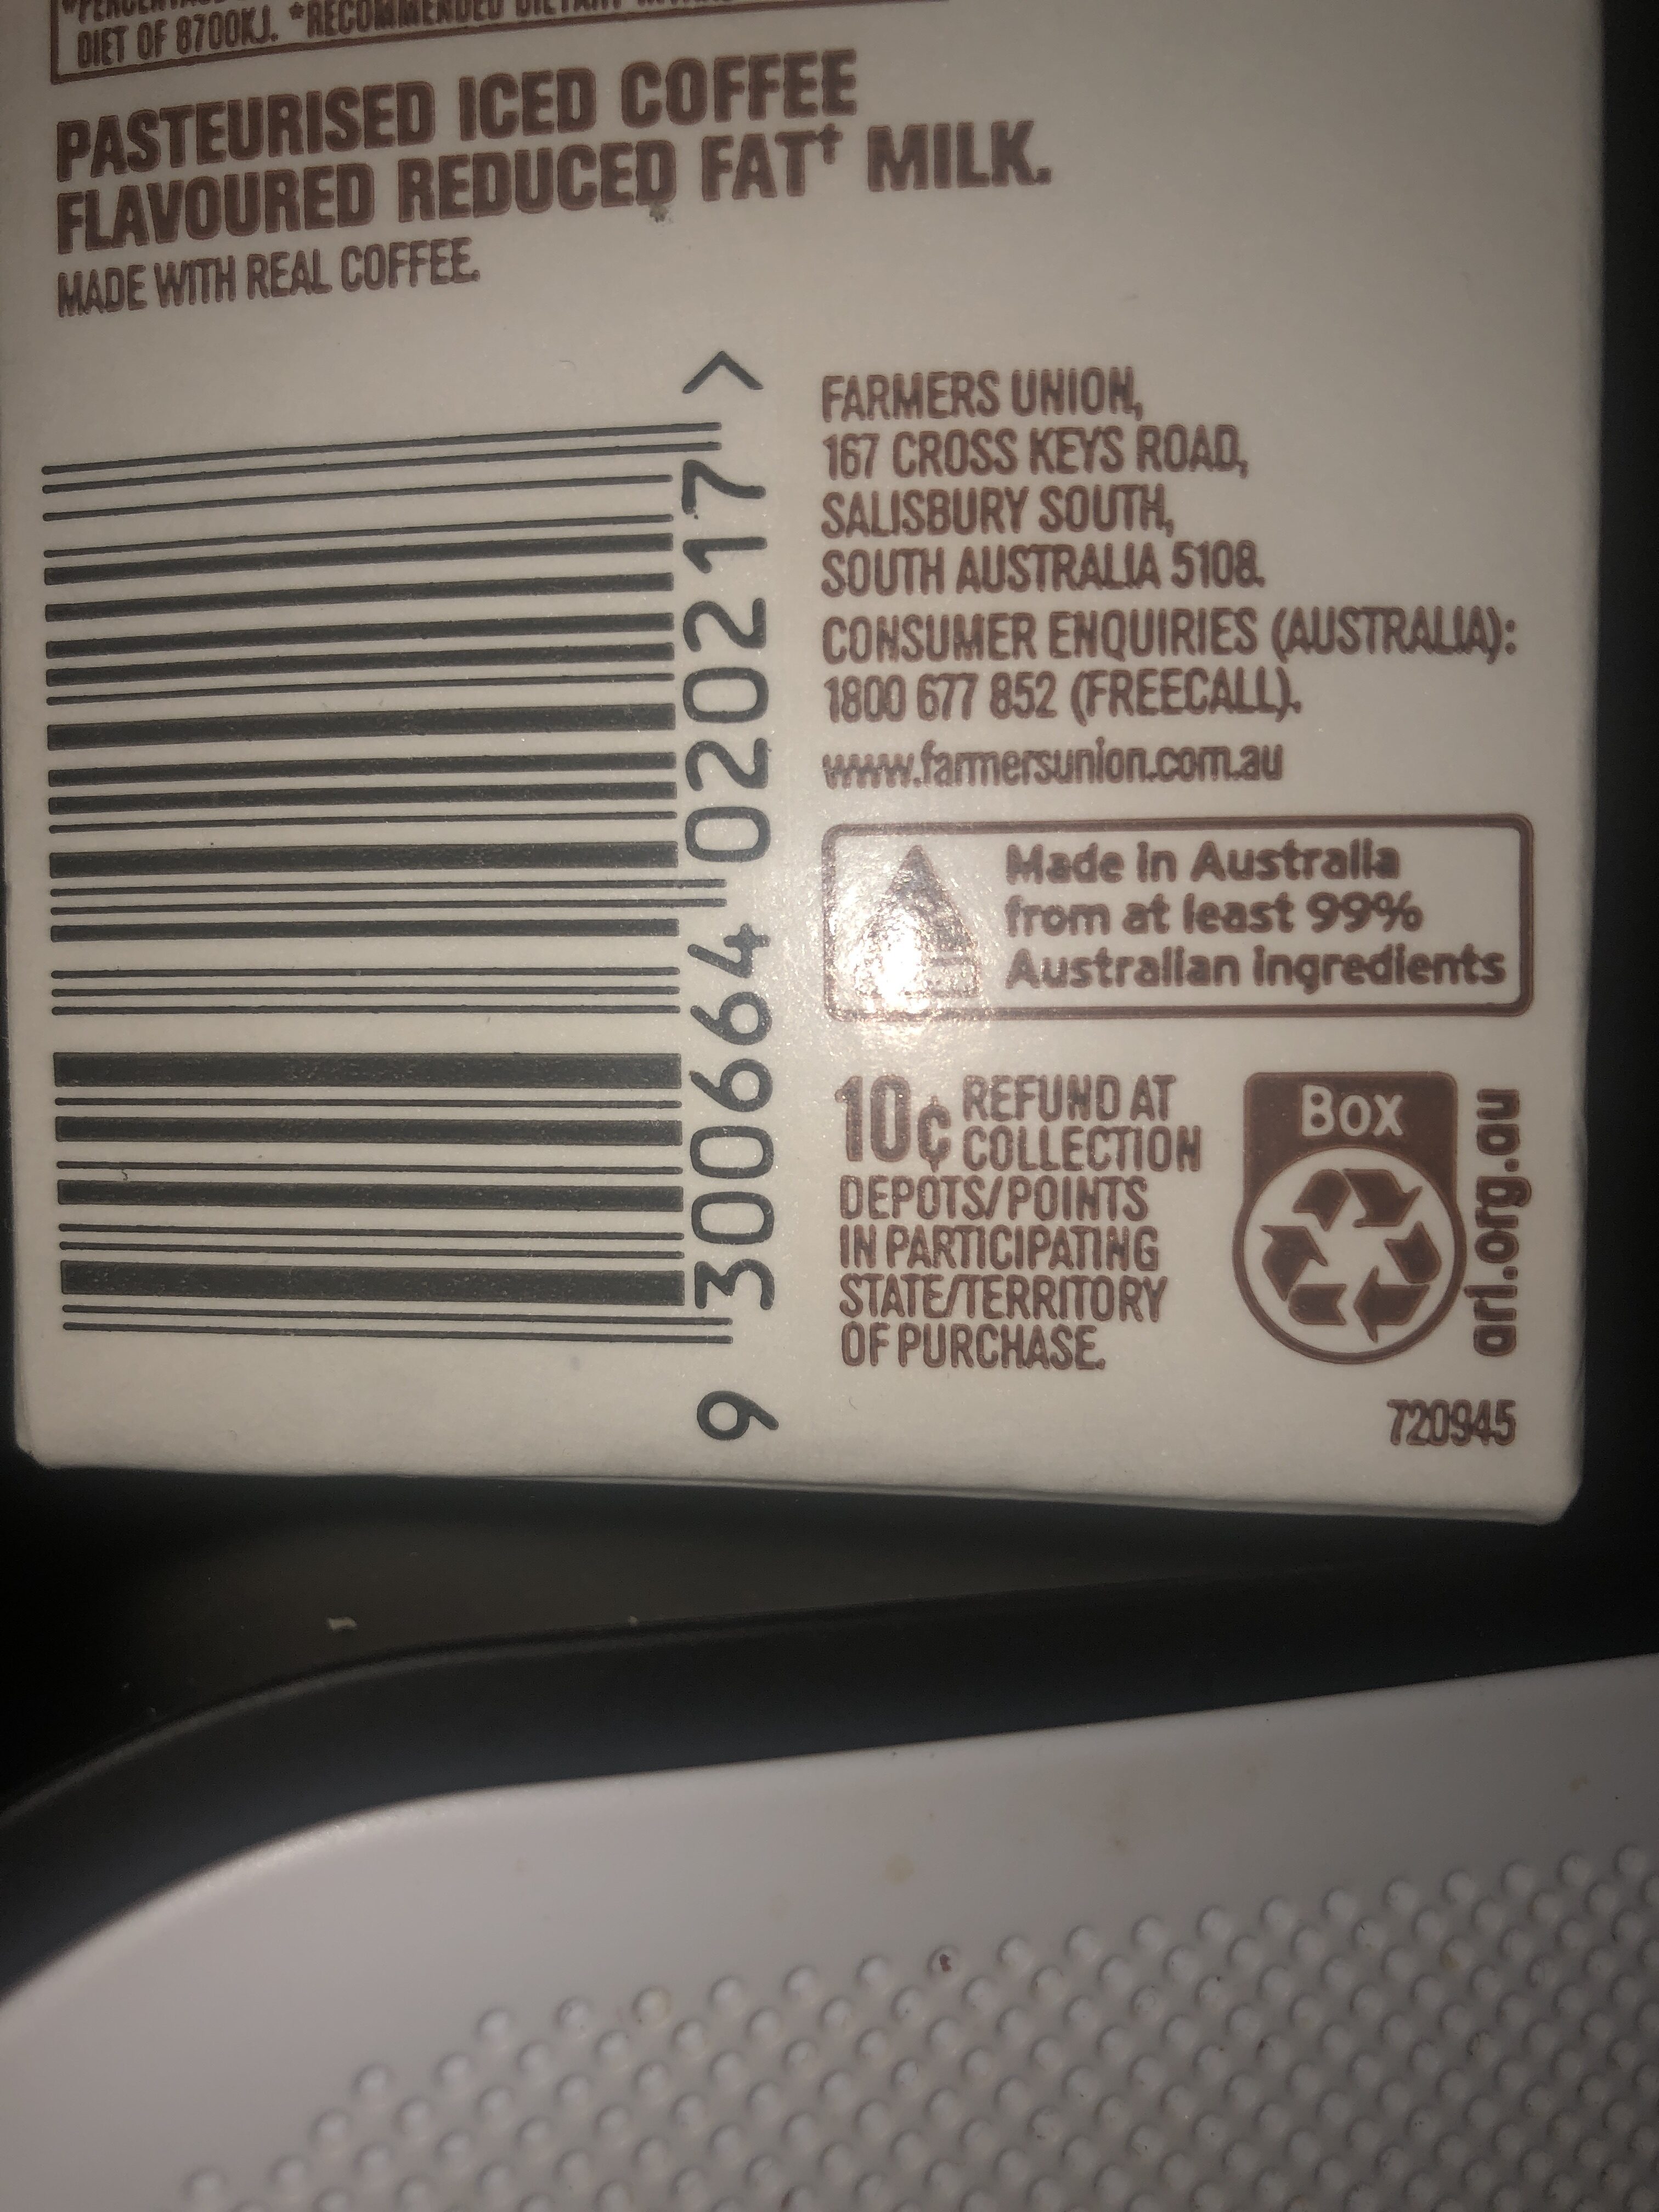 Iced Coffee - Recycling instructions and/or packaging information